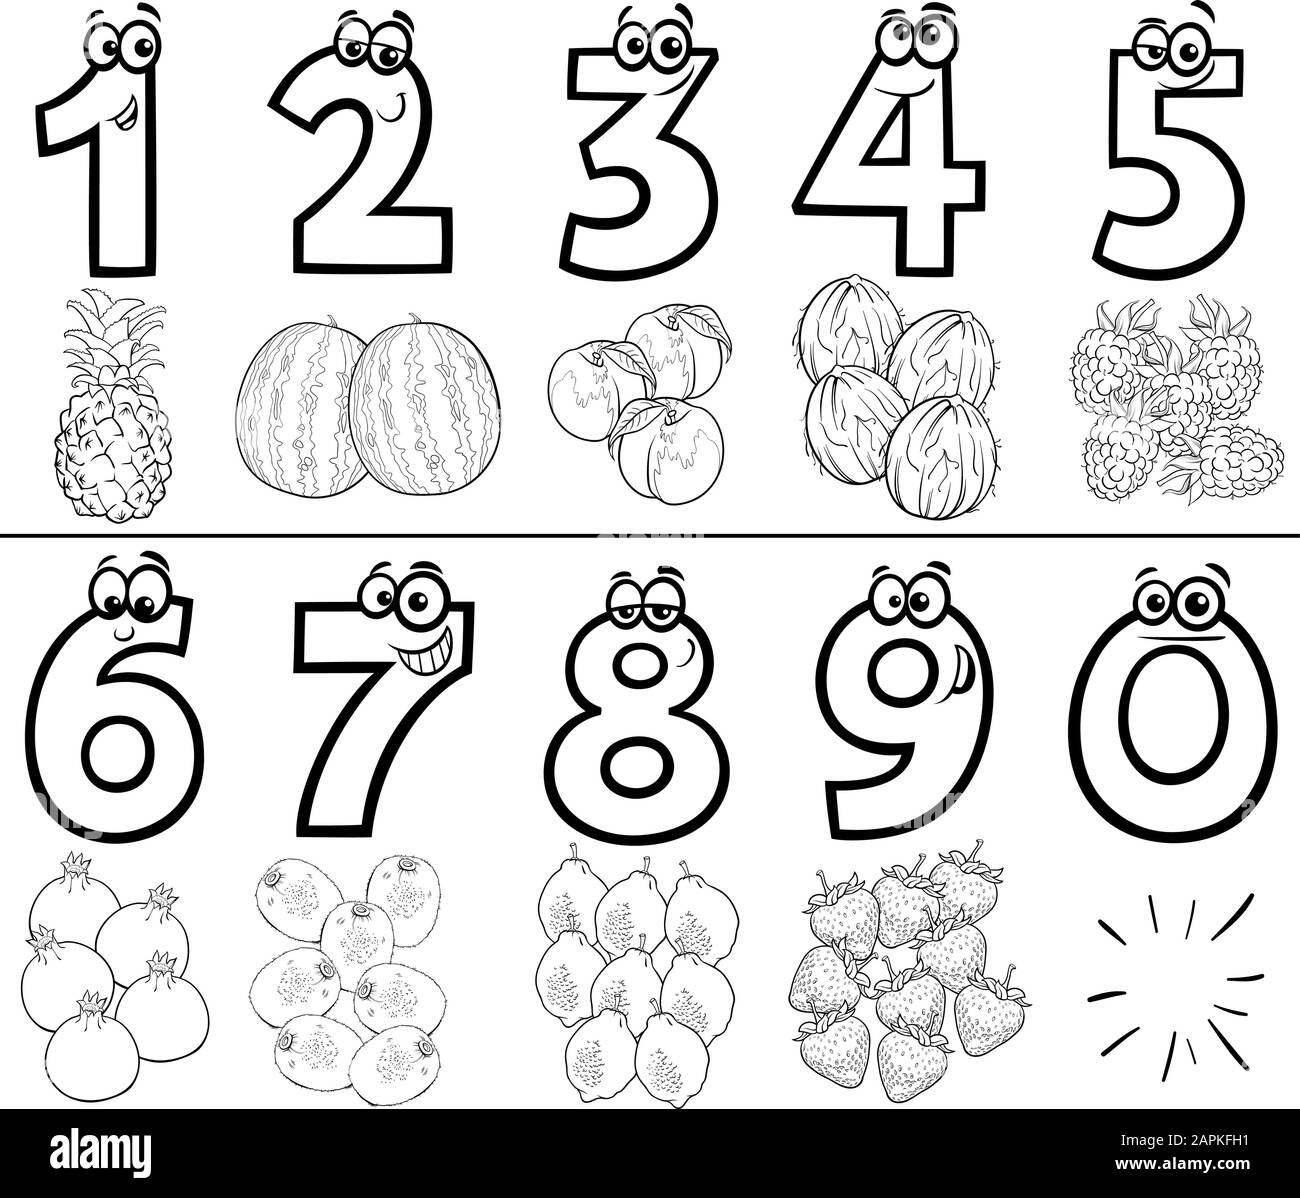 Black and White Cartoon Illustration of Educational Numbers Set from One to Nine with Fruits Food Objects Coloring Book Page Stock Vector